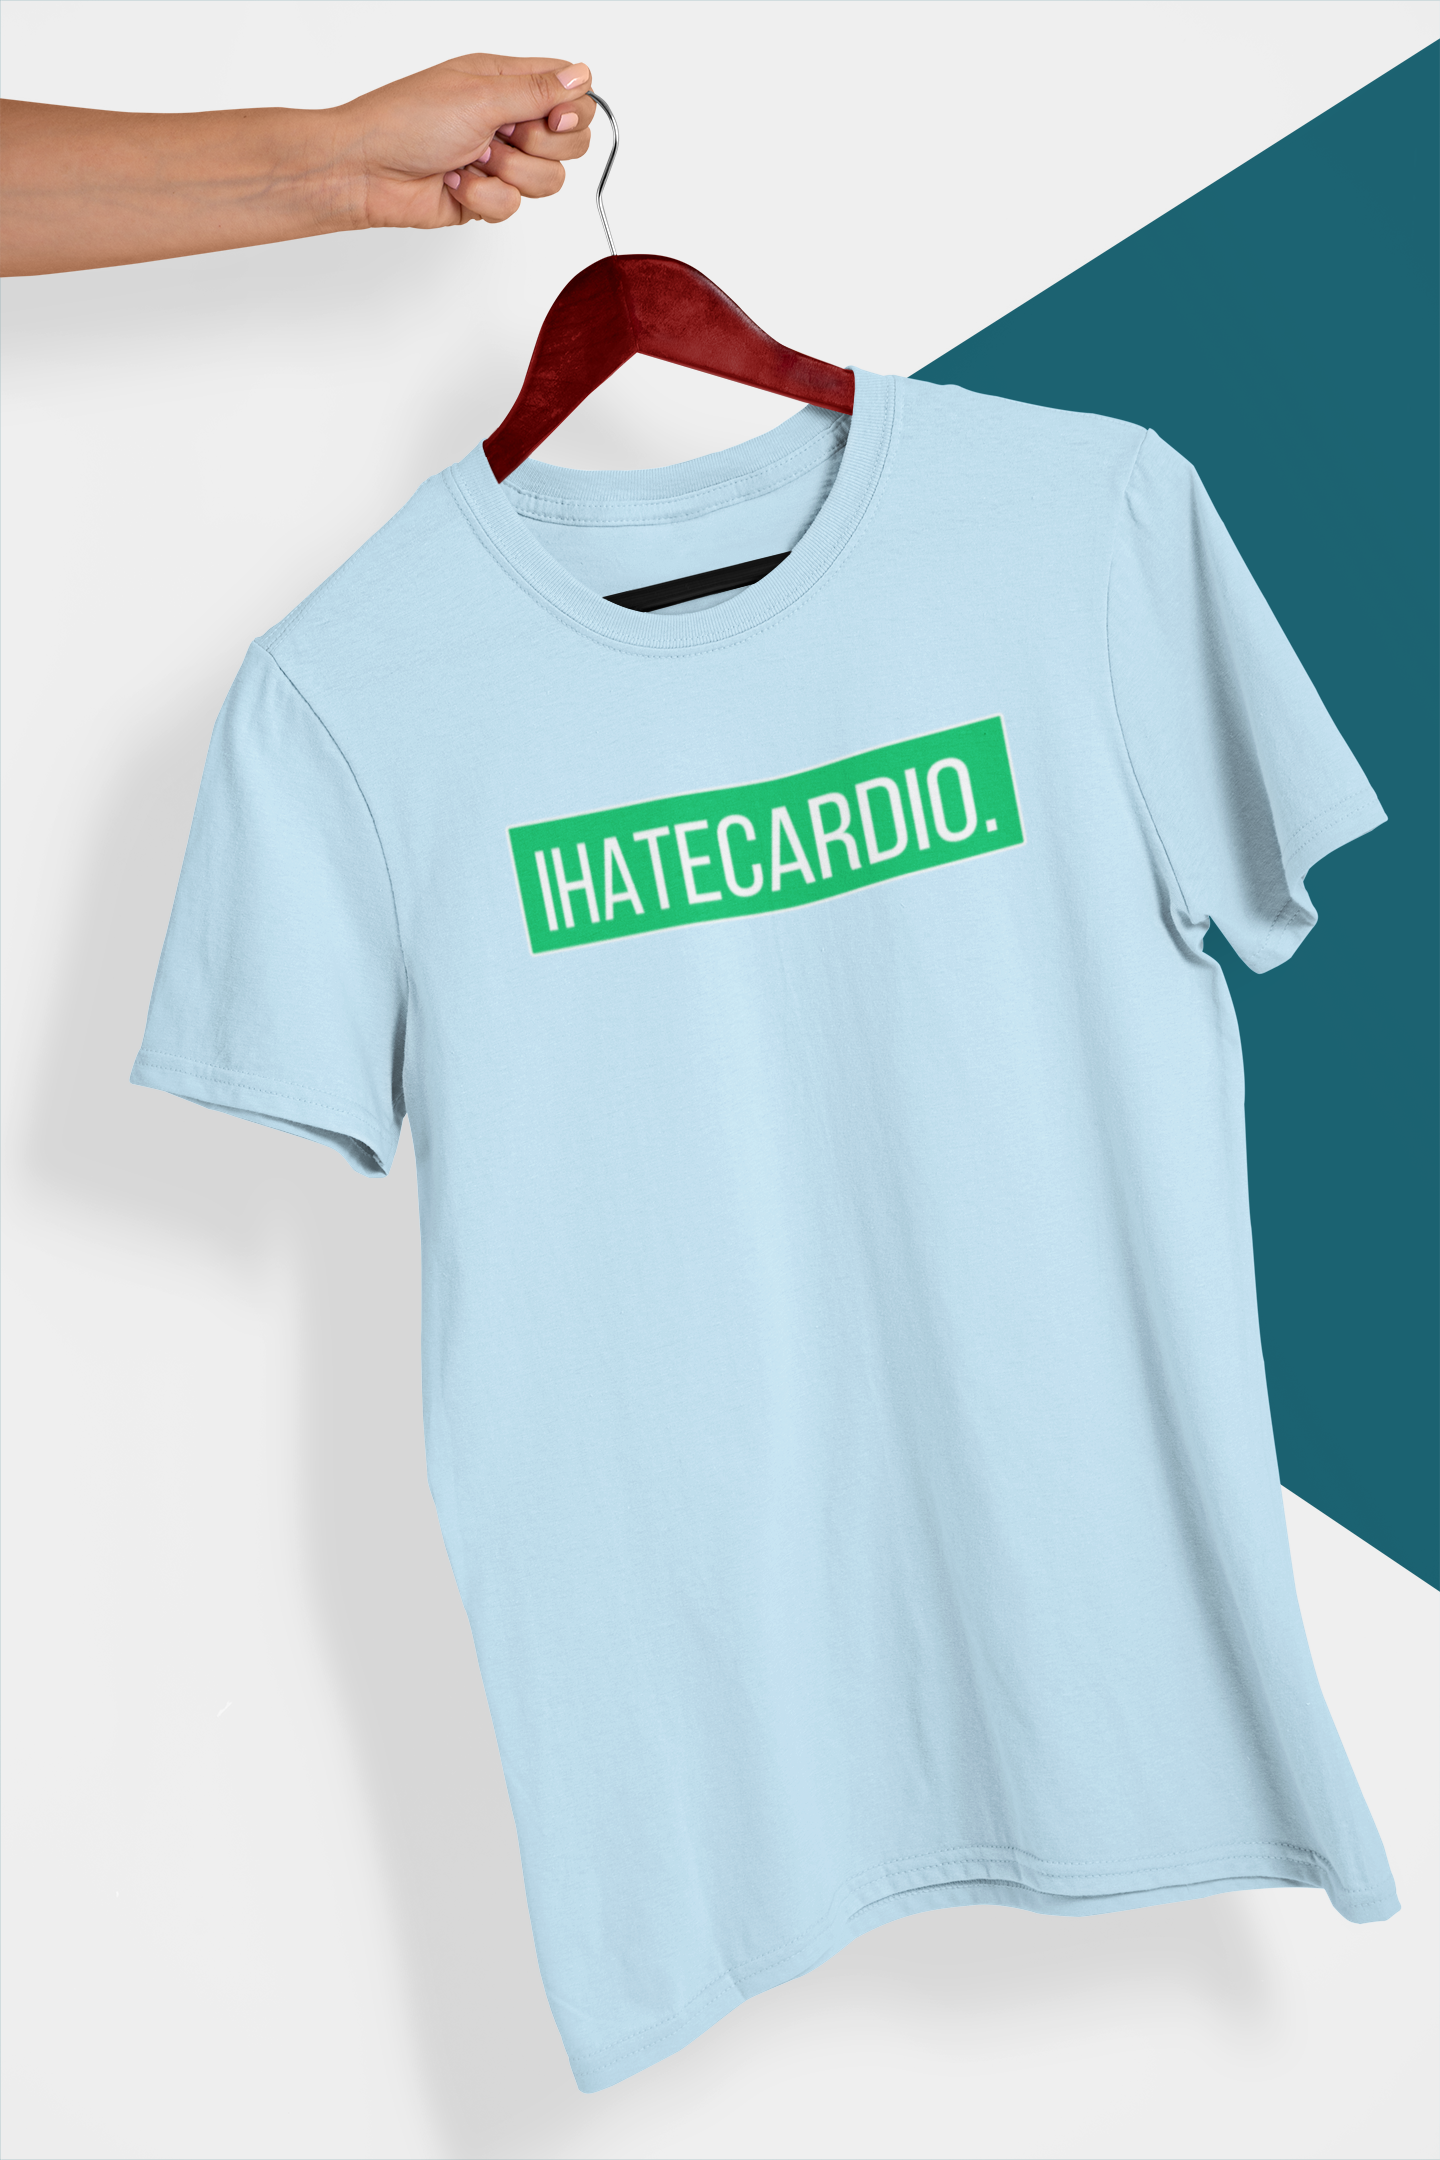 I Hate Cardio - Gym T Shirt Strong Soul Shirts & Tops